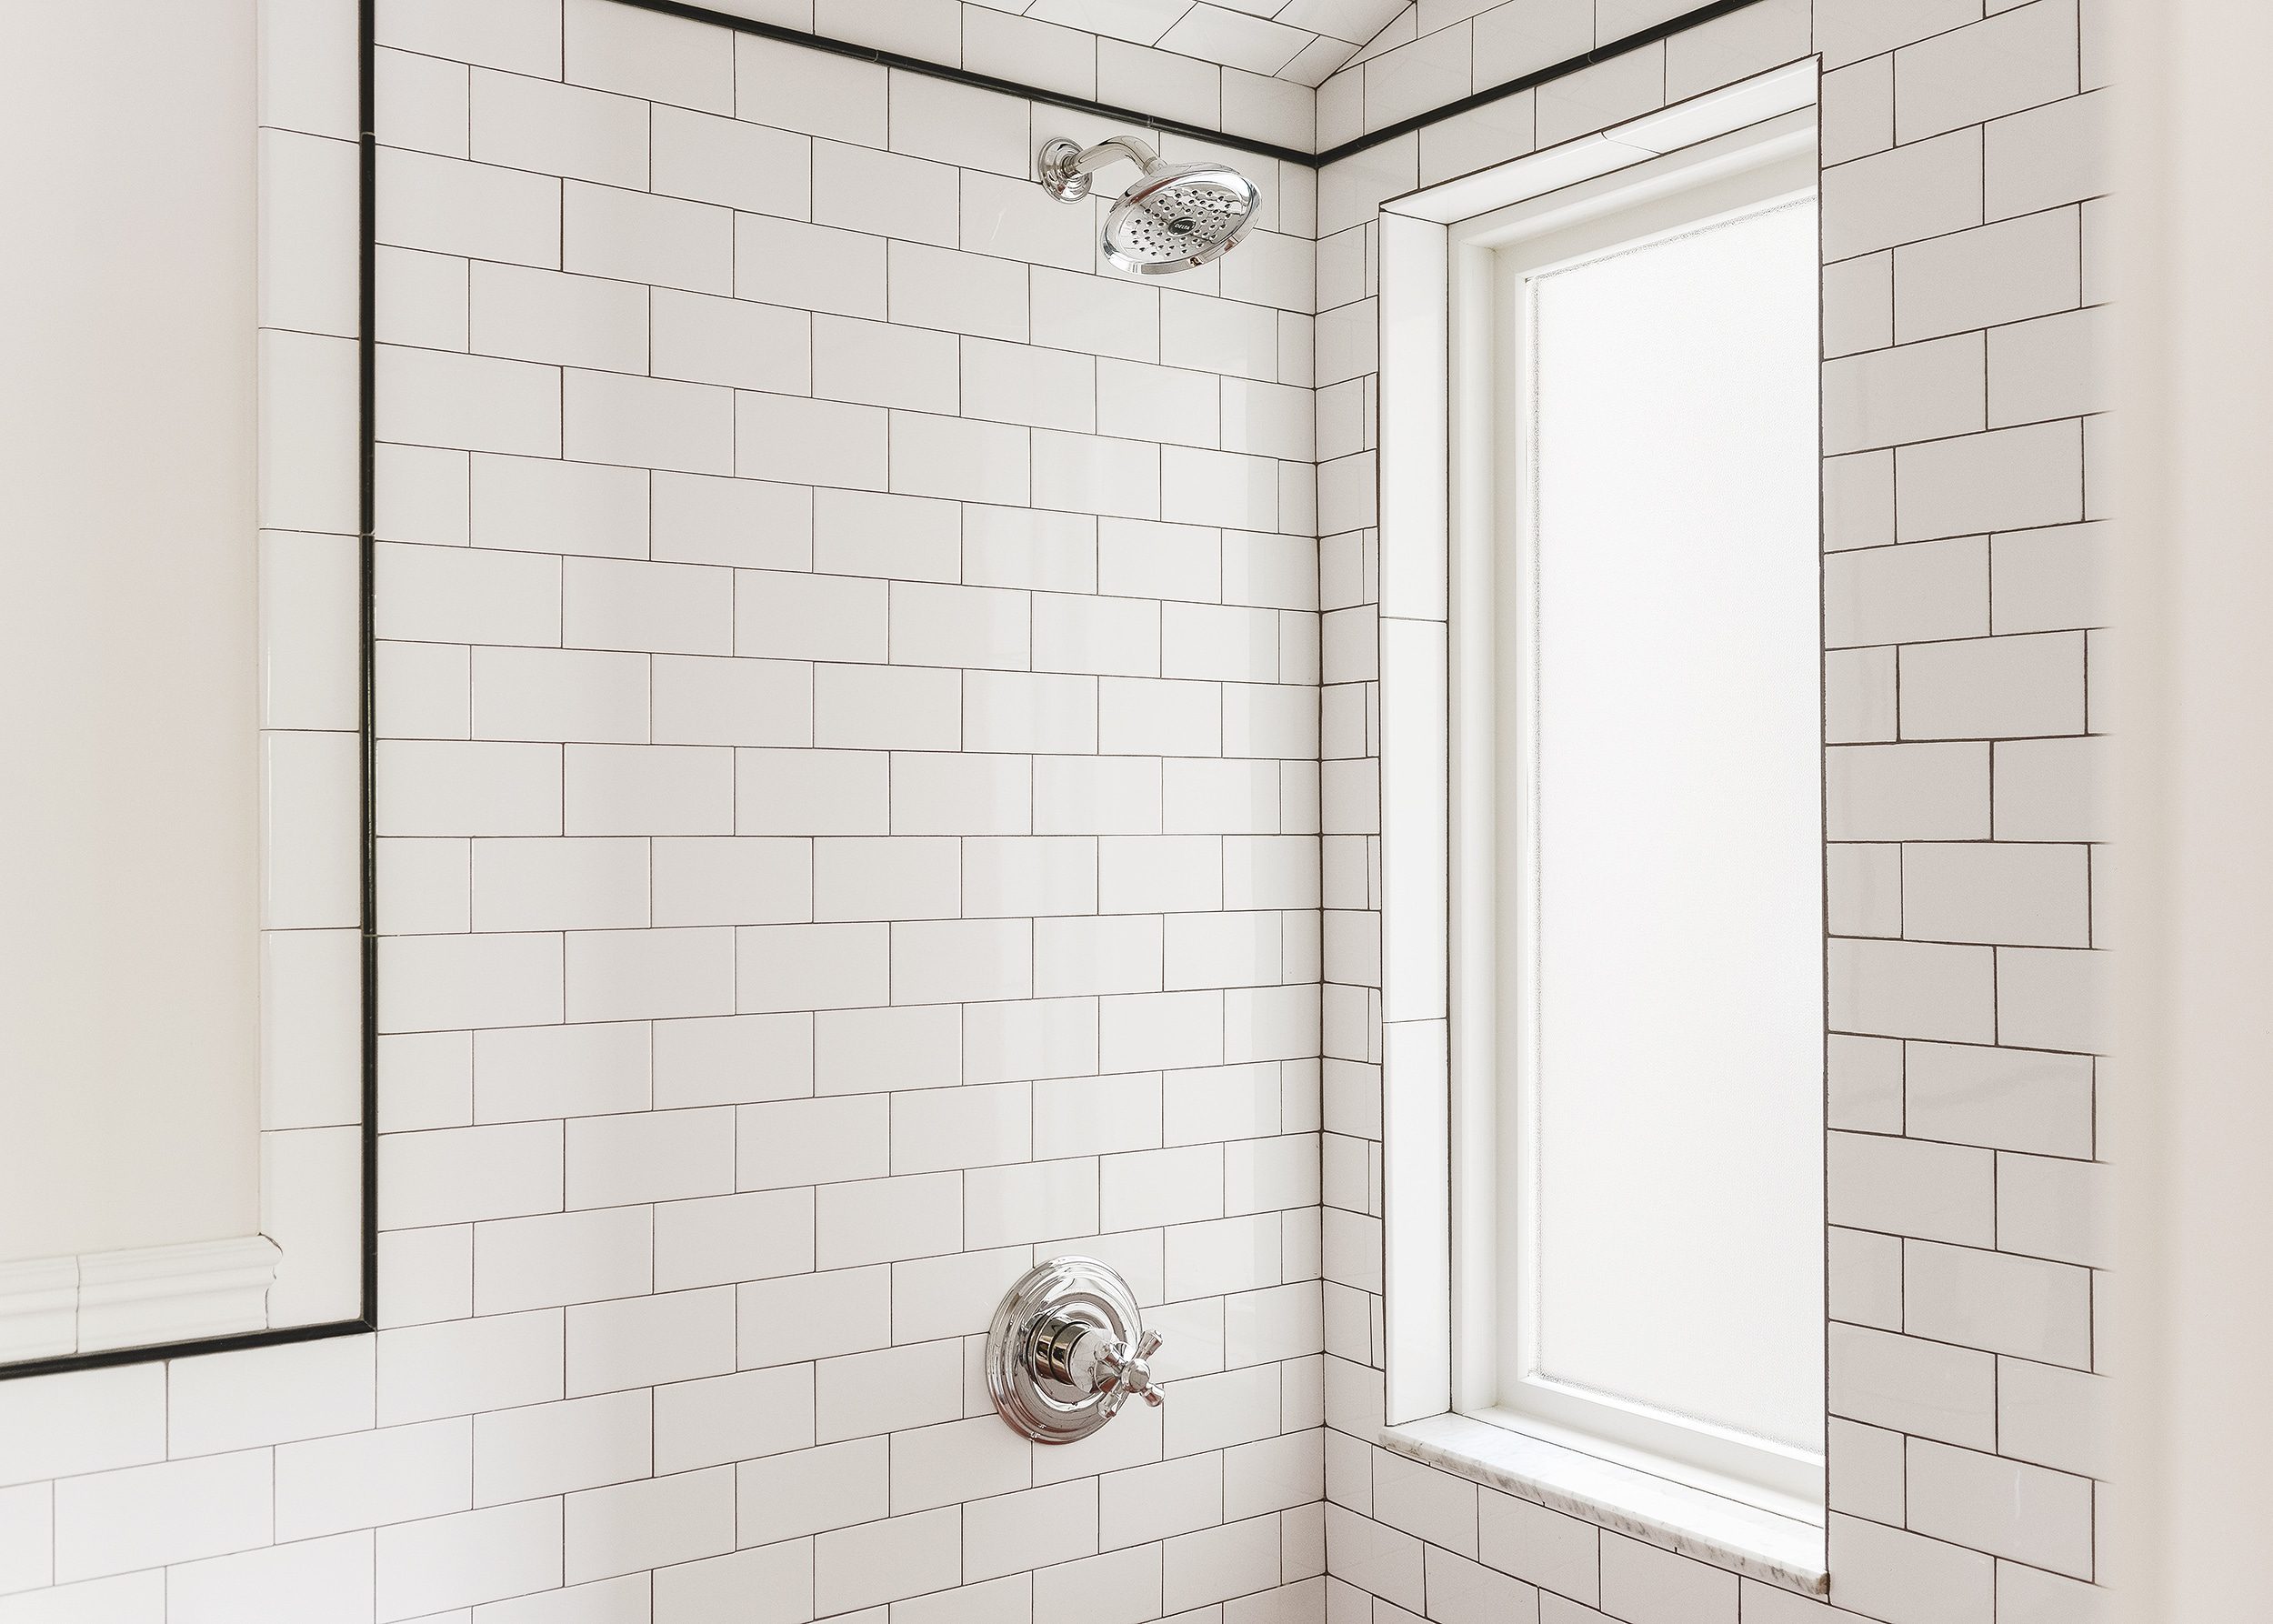 A newly installed obscure glass Andersen window in a bathroom with white subway tile walls, dark grout and a vintage pink tub // via Yellow Brick Home